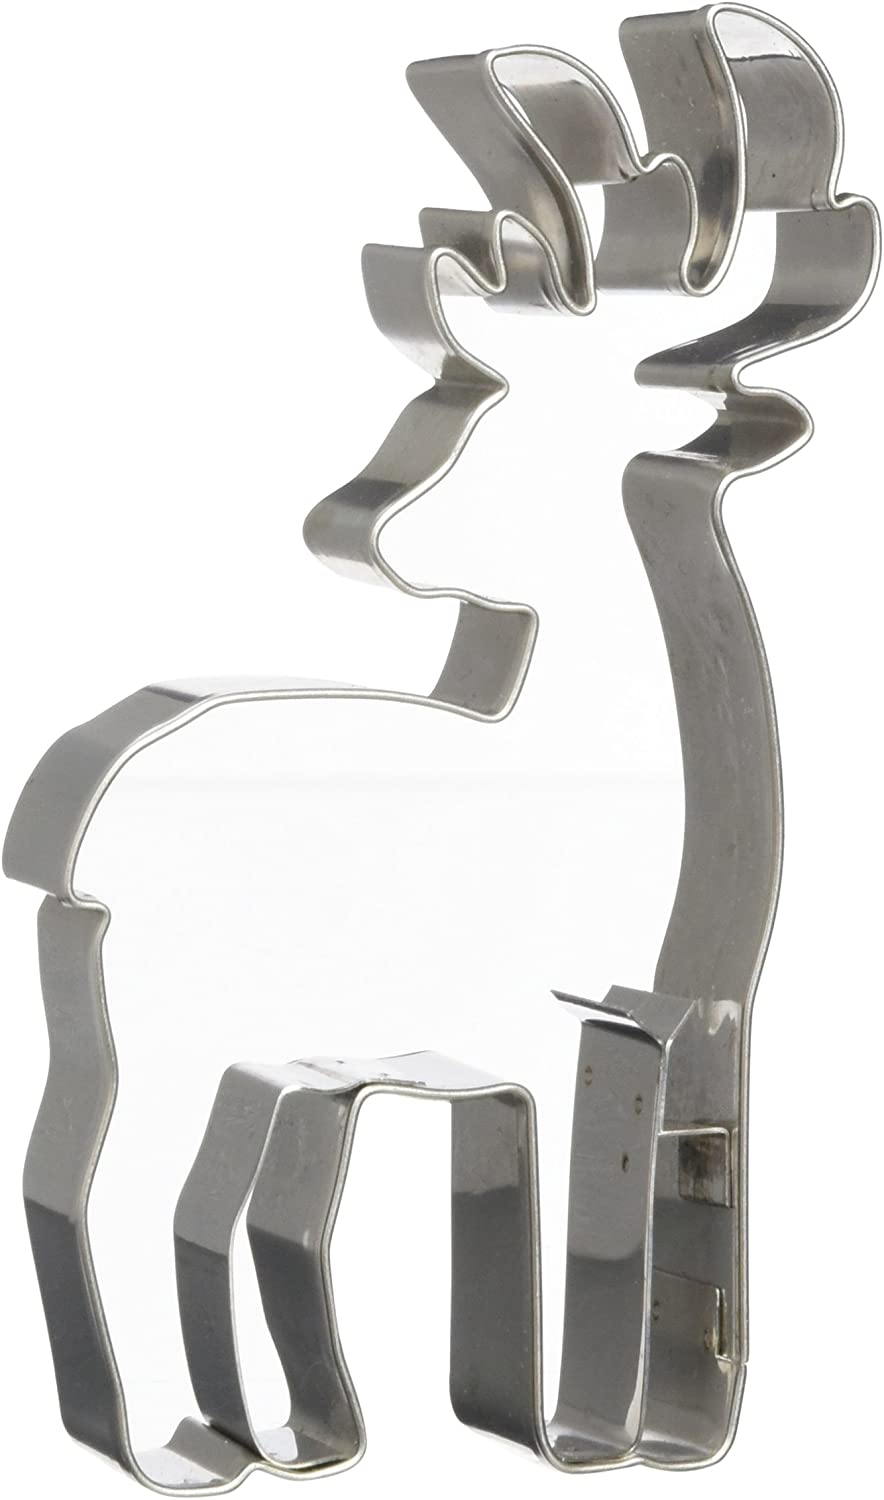 Staedter Städter Stag Cookie Cutter, Stainless Steel, Silver, 11 x 11 x 3 cm